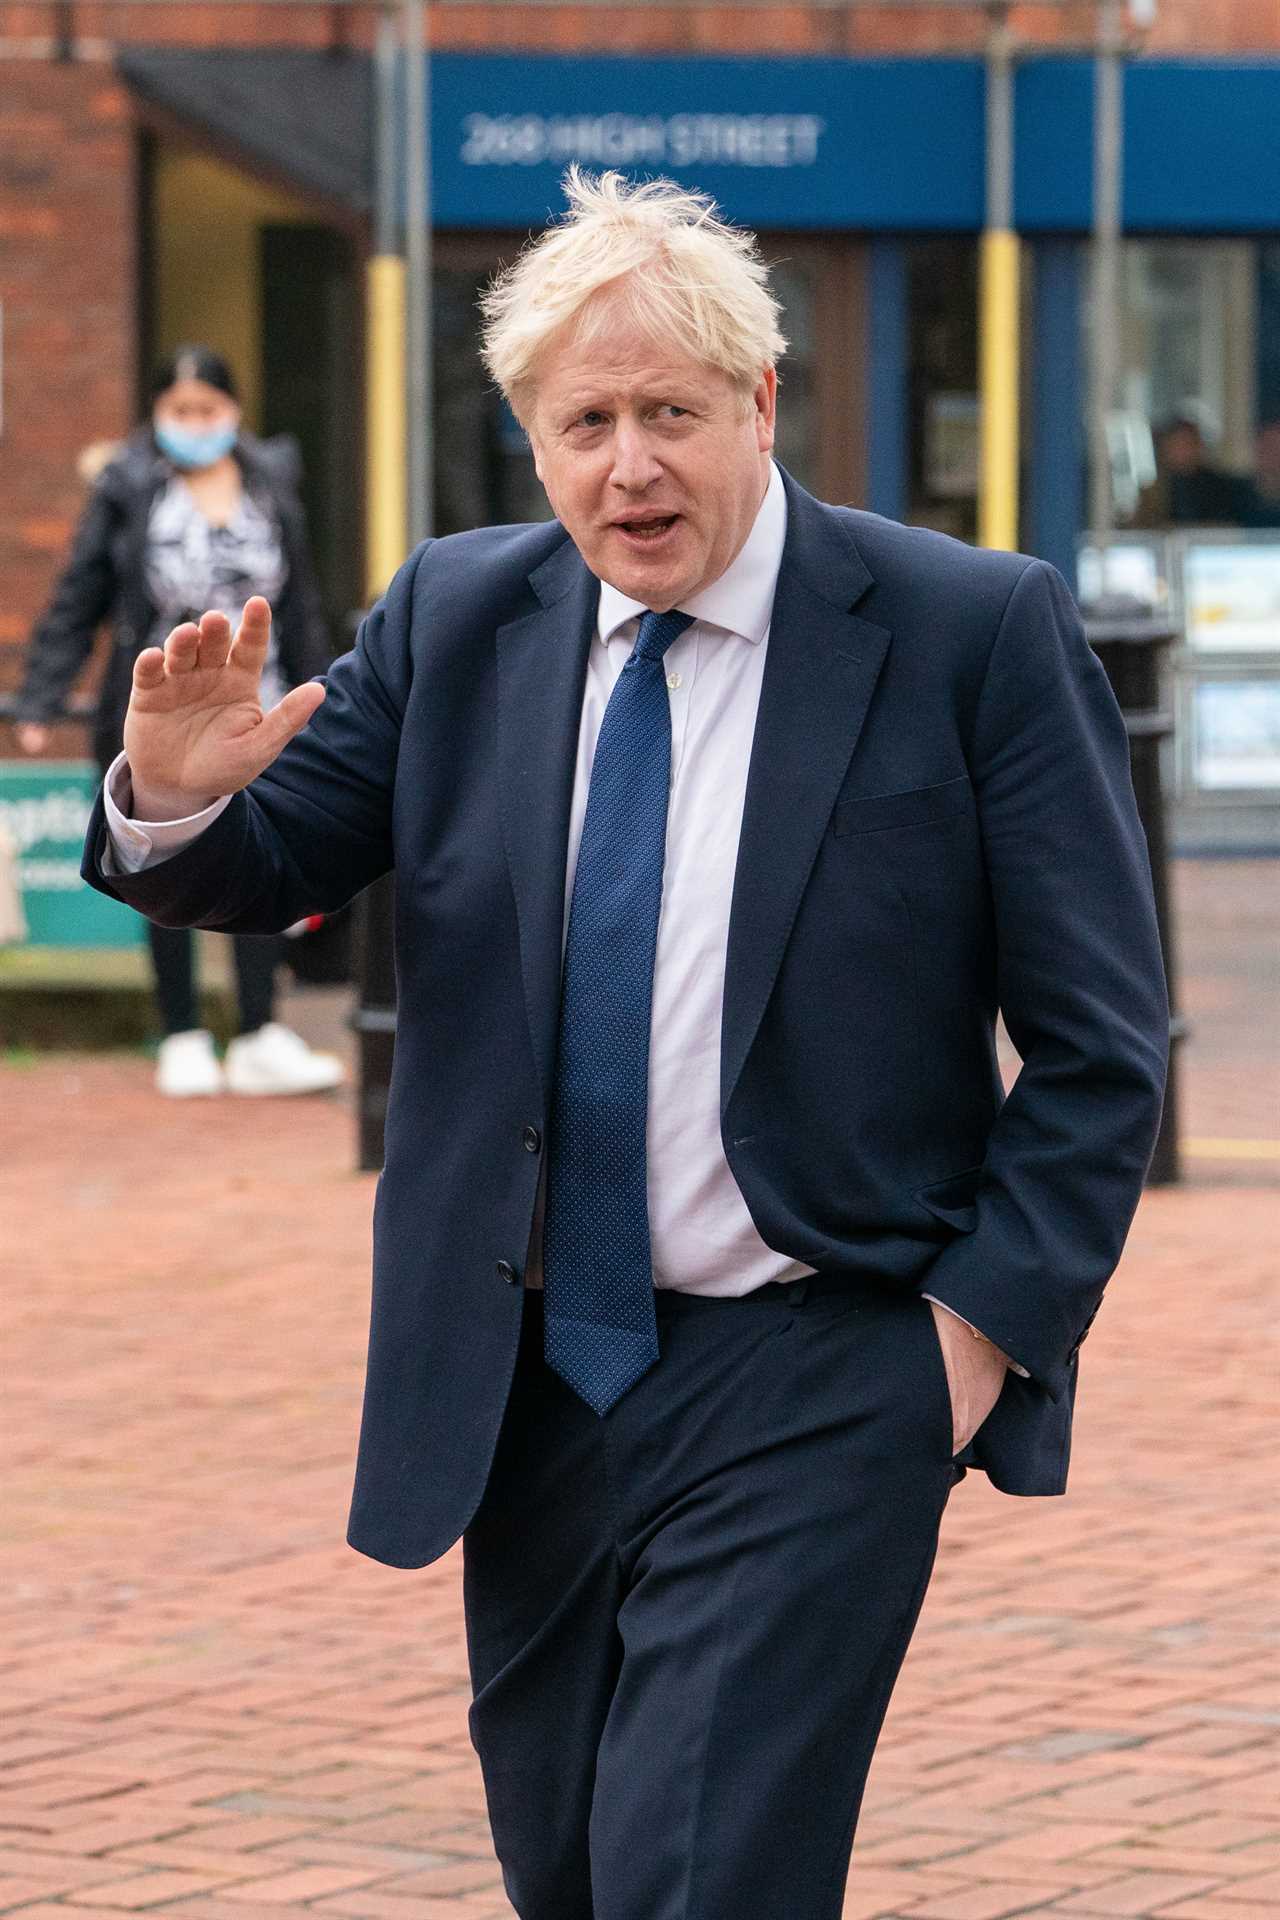 Boris Johnson set to command five figure sums for after-dinner speeches when he leaves No10